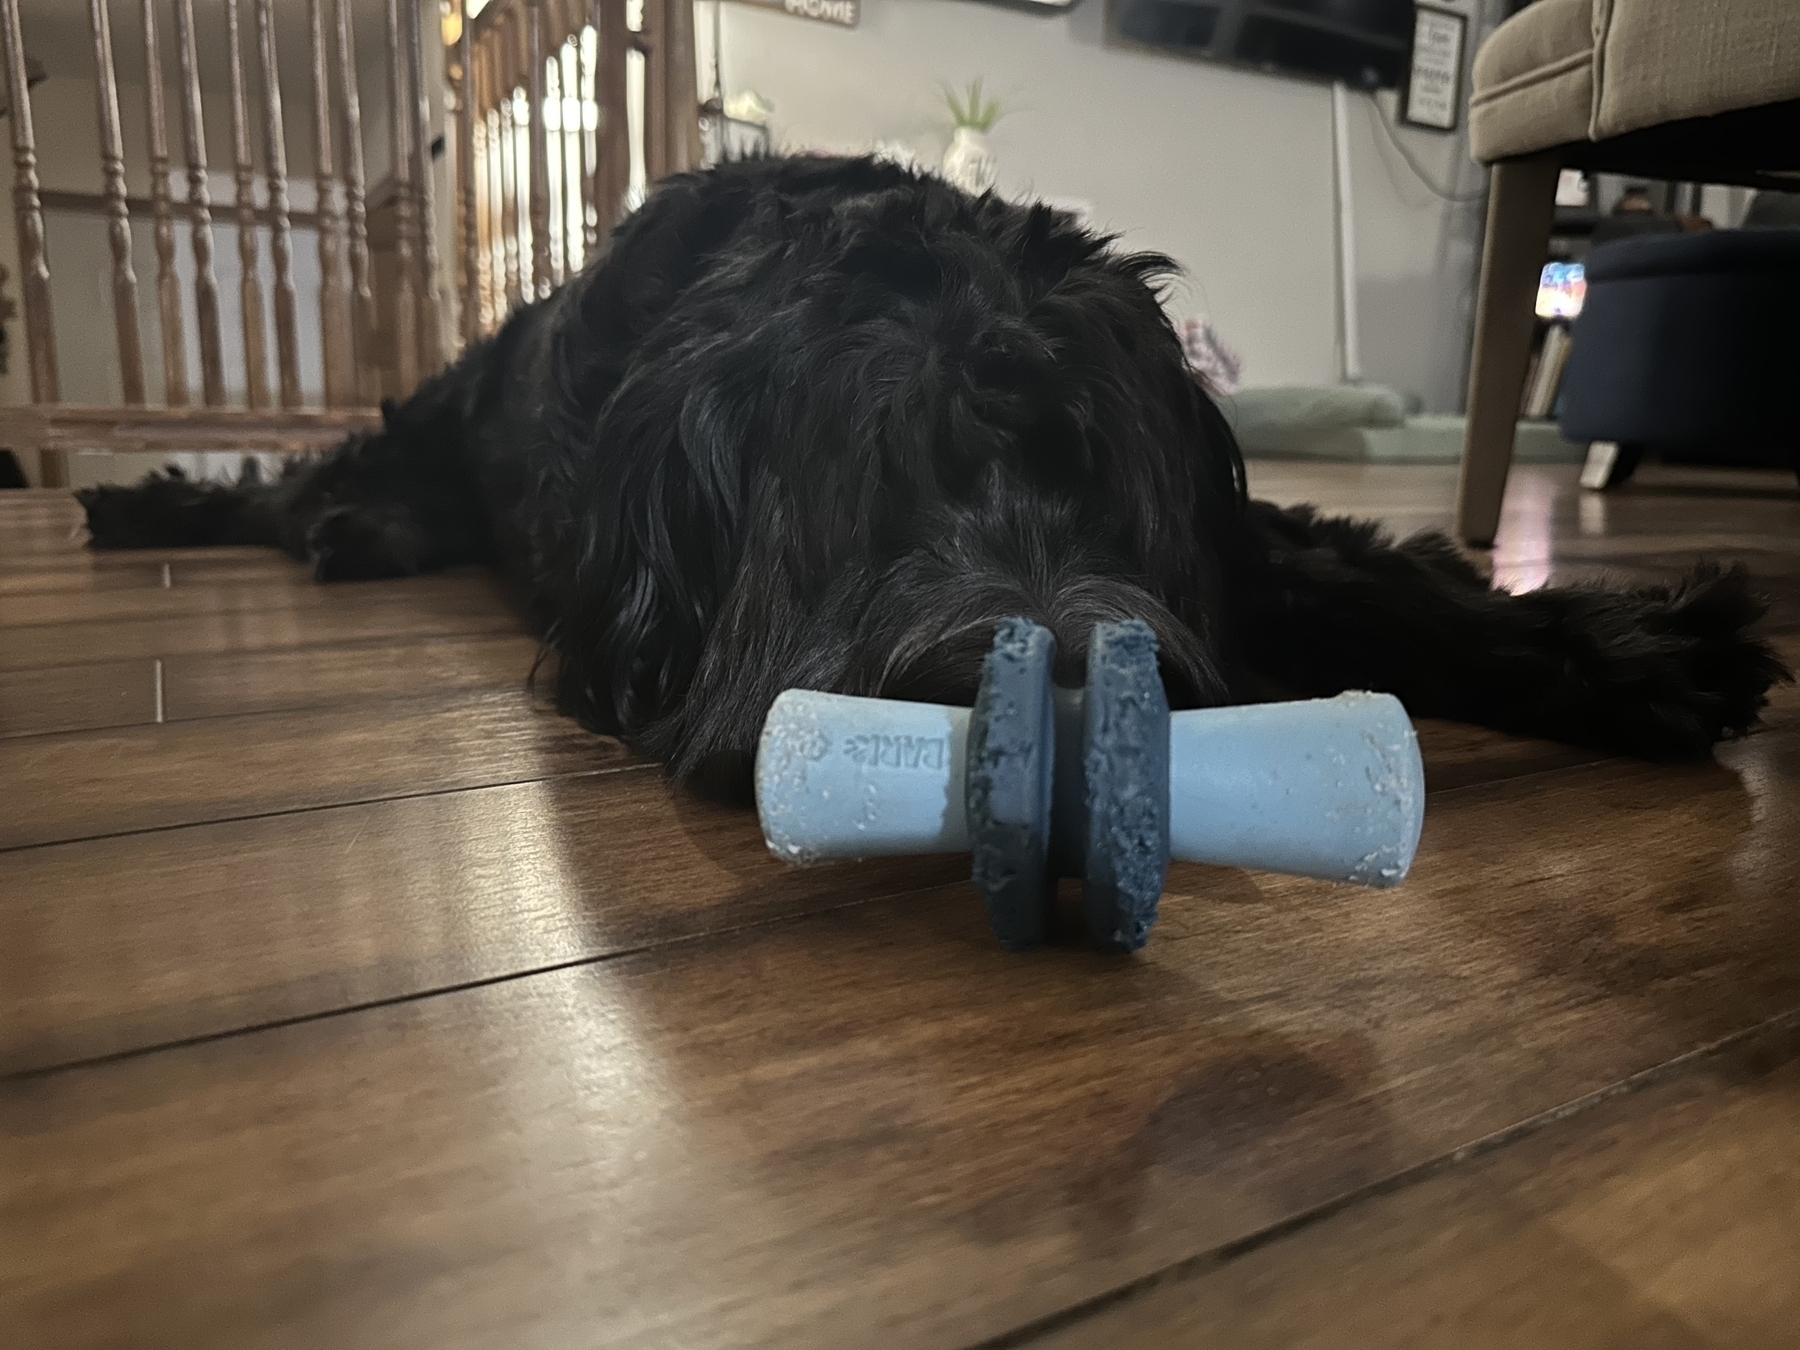 A black dog lies on a wooden floor with a blue toy in the foreground, resting its head out of view, in a home setting.